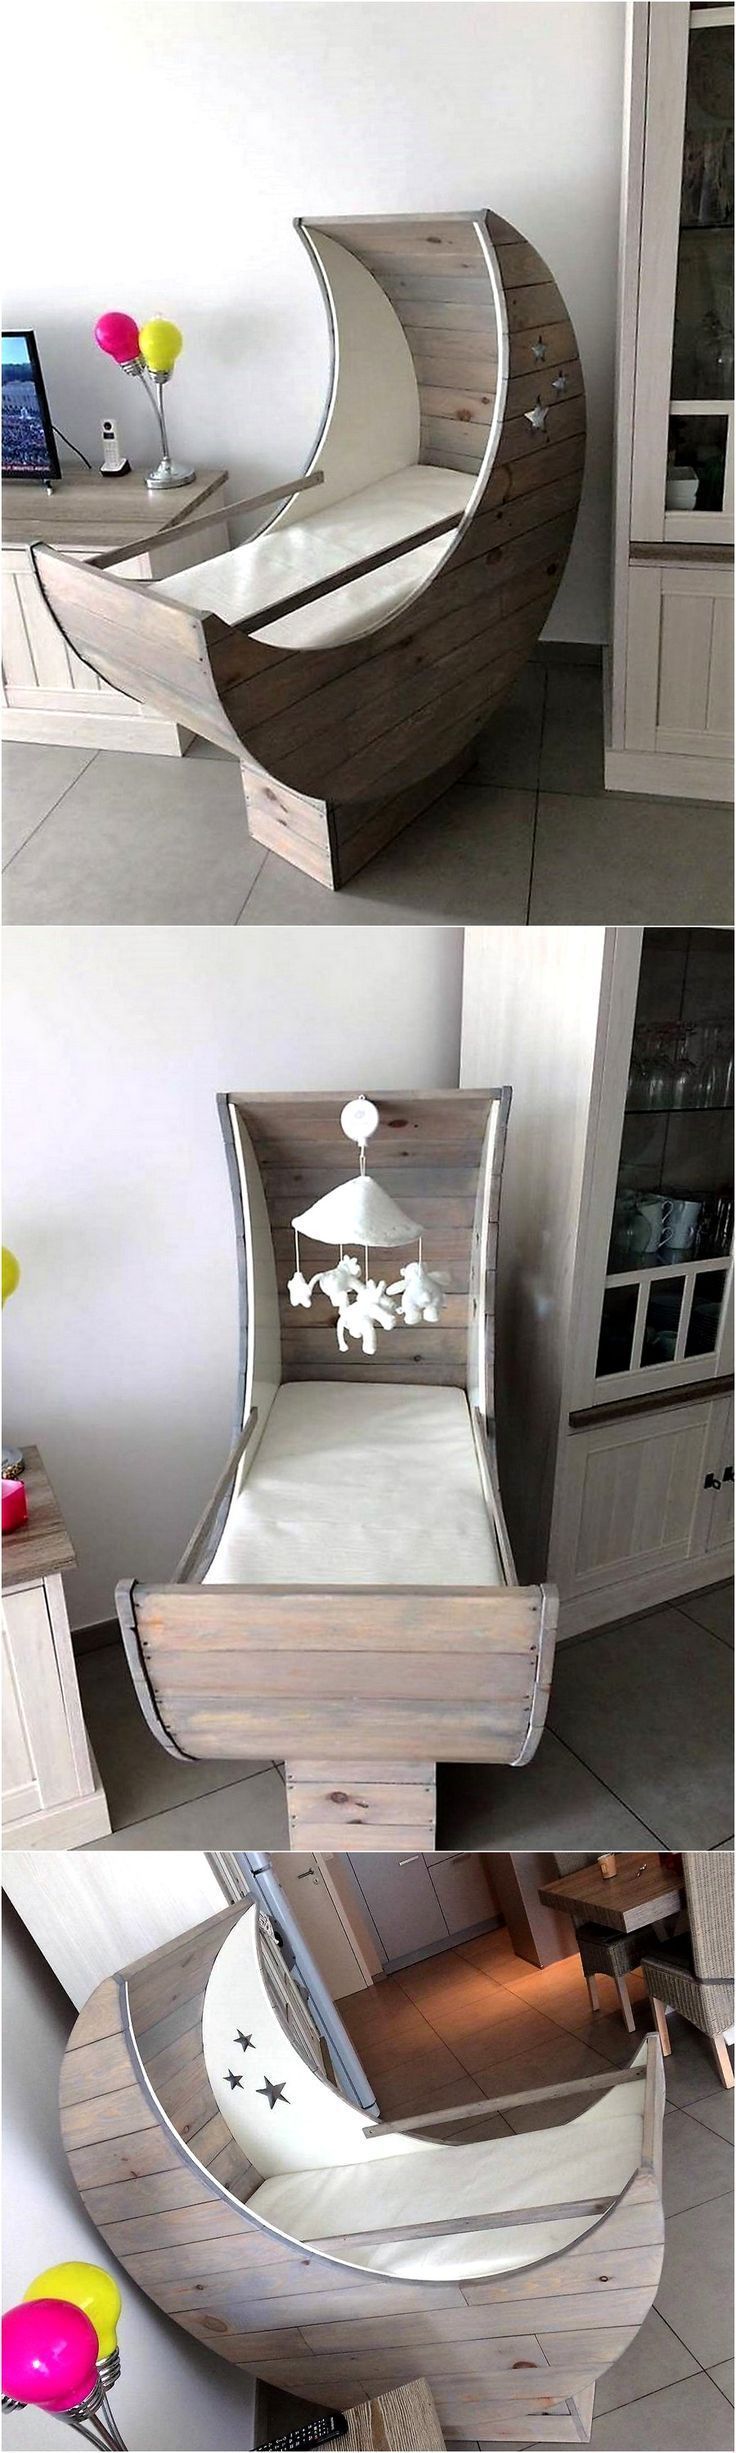 This is a pallet wood made baby cradle half moon. First tell me how about the id…